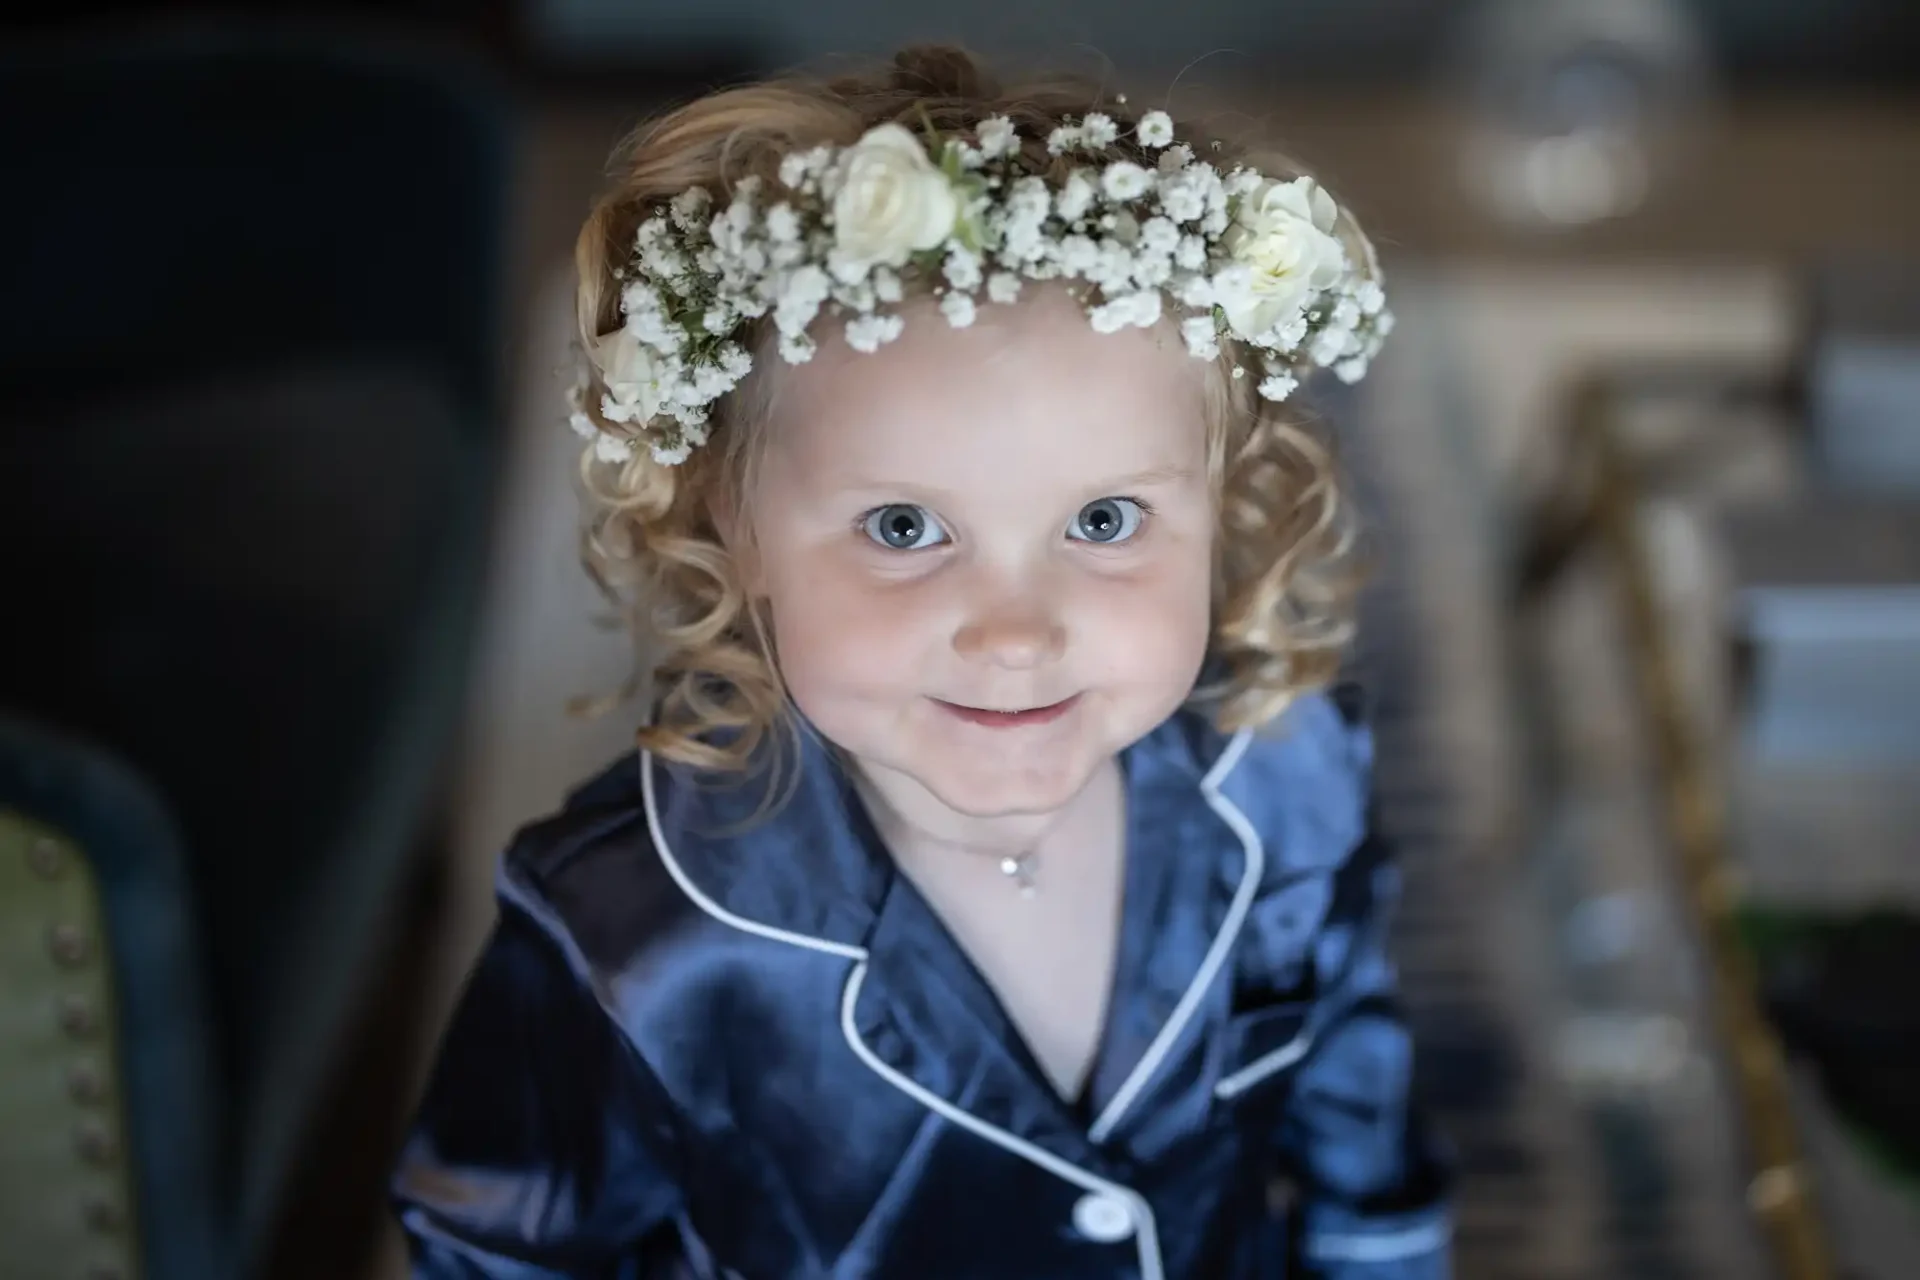 A young child with curly hair wearing a floral headband and a blue satin outfit, smiling at the camera.